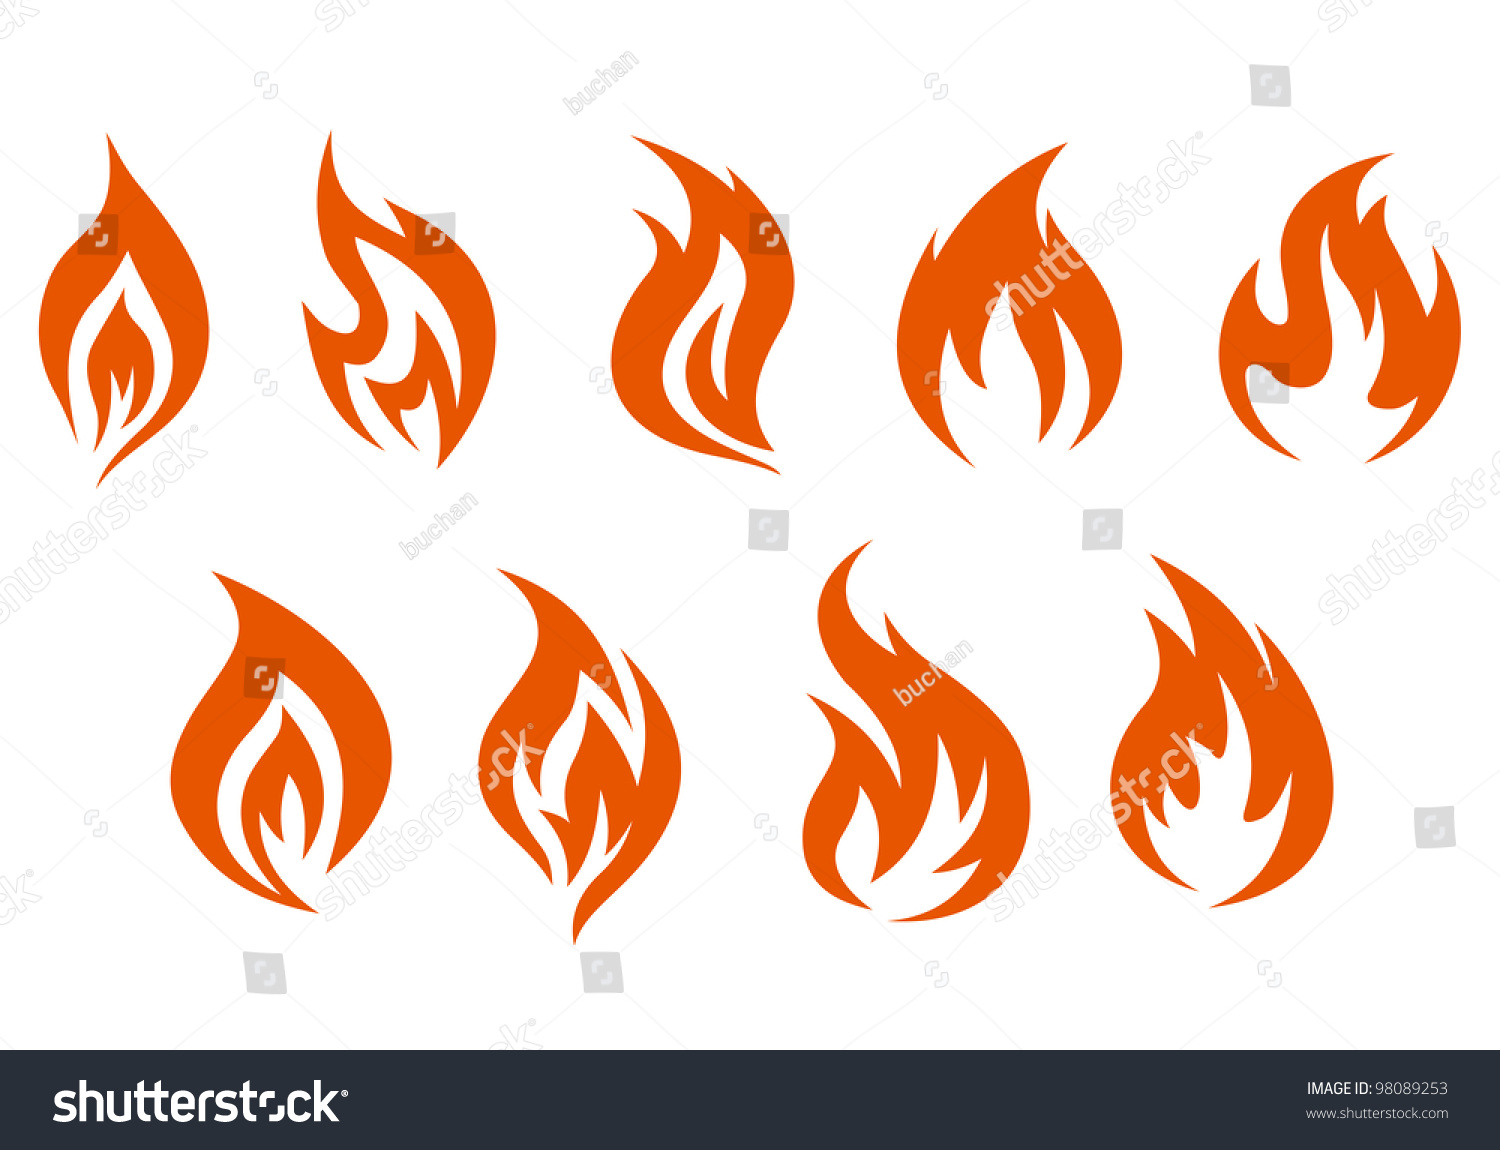 Fire Symbols Isolated On White Background Stock Vector 98089253